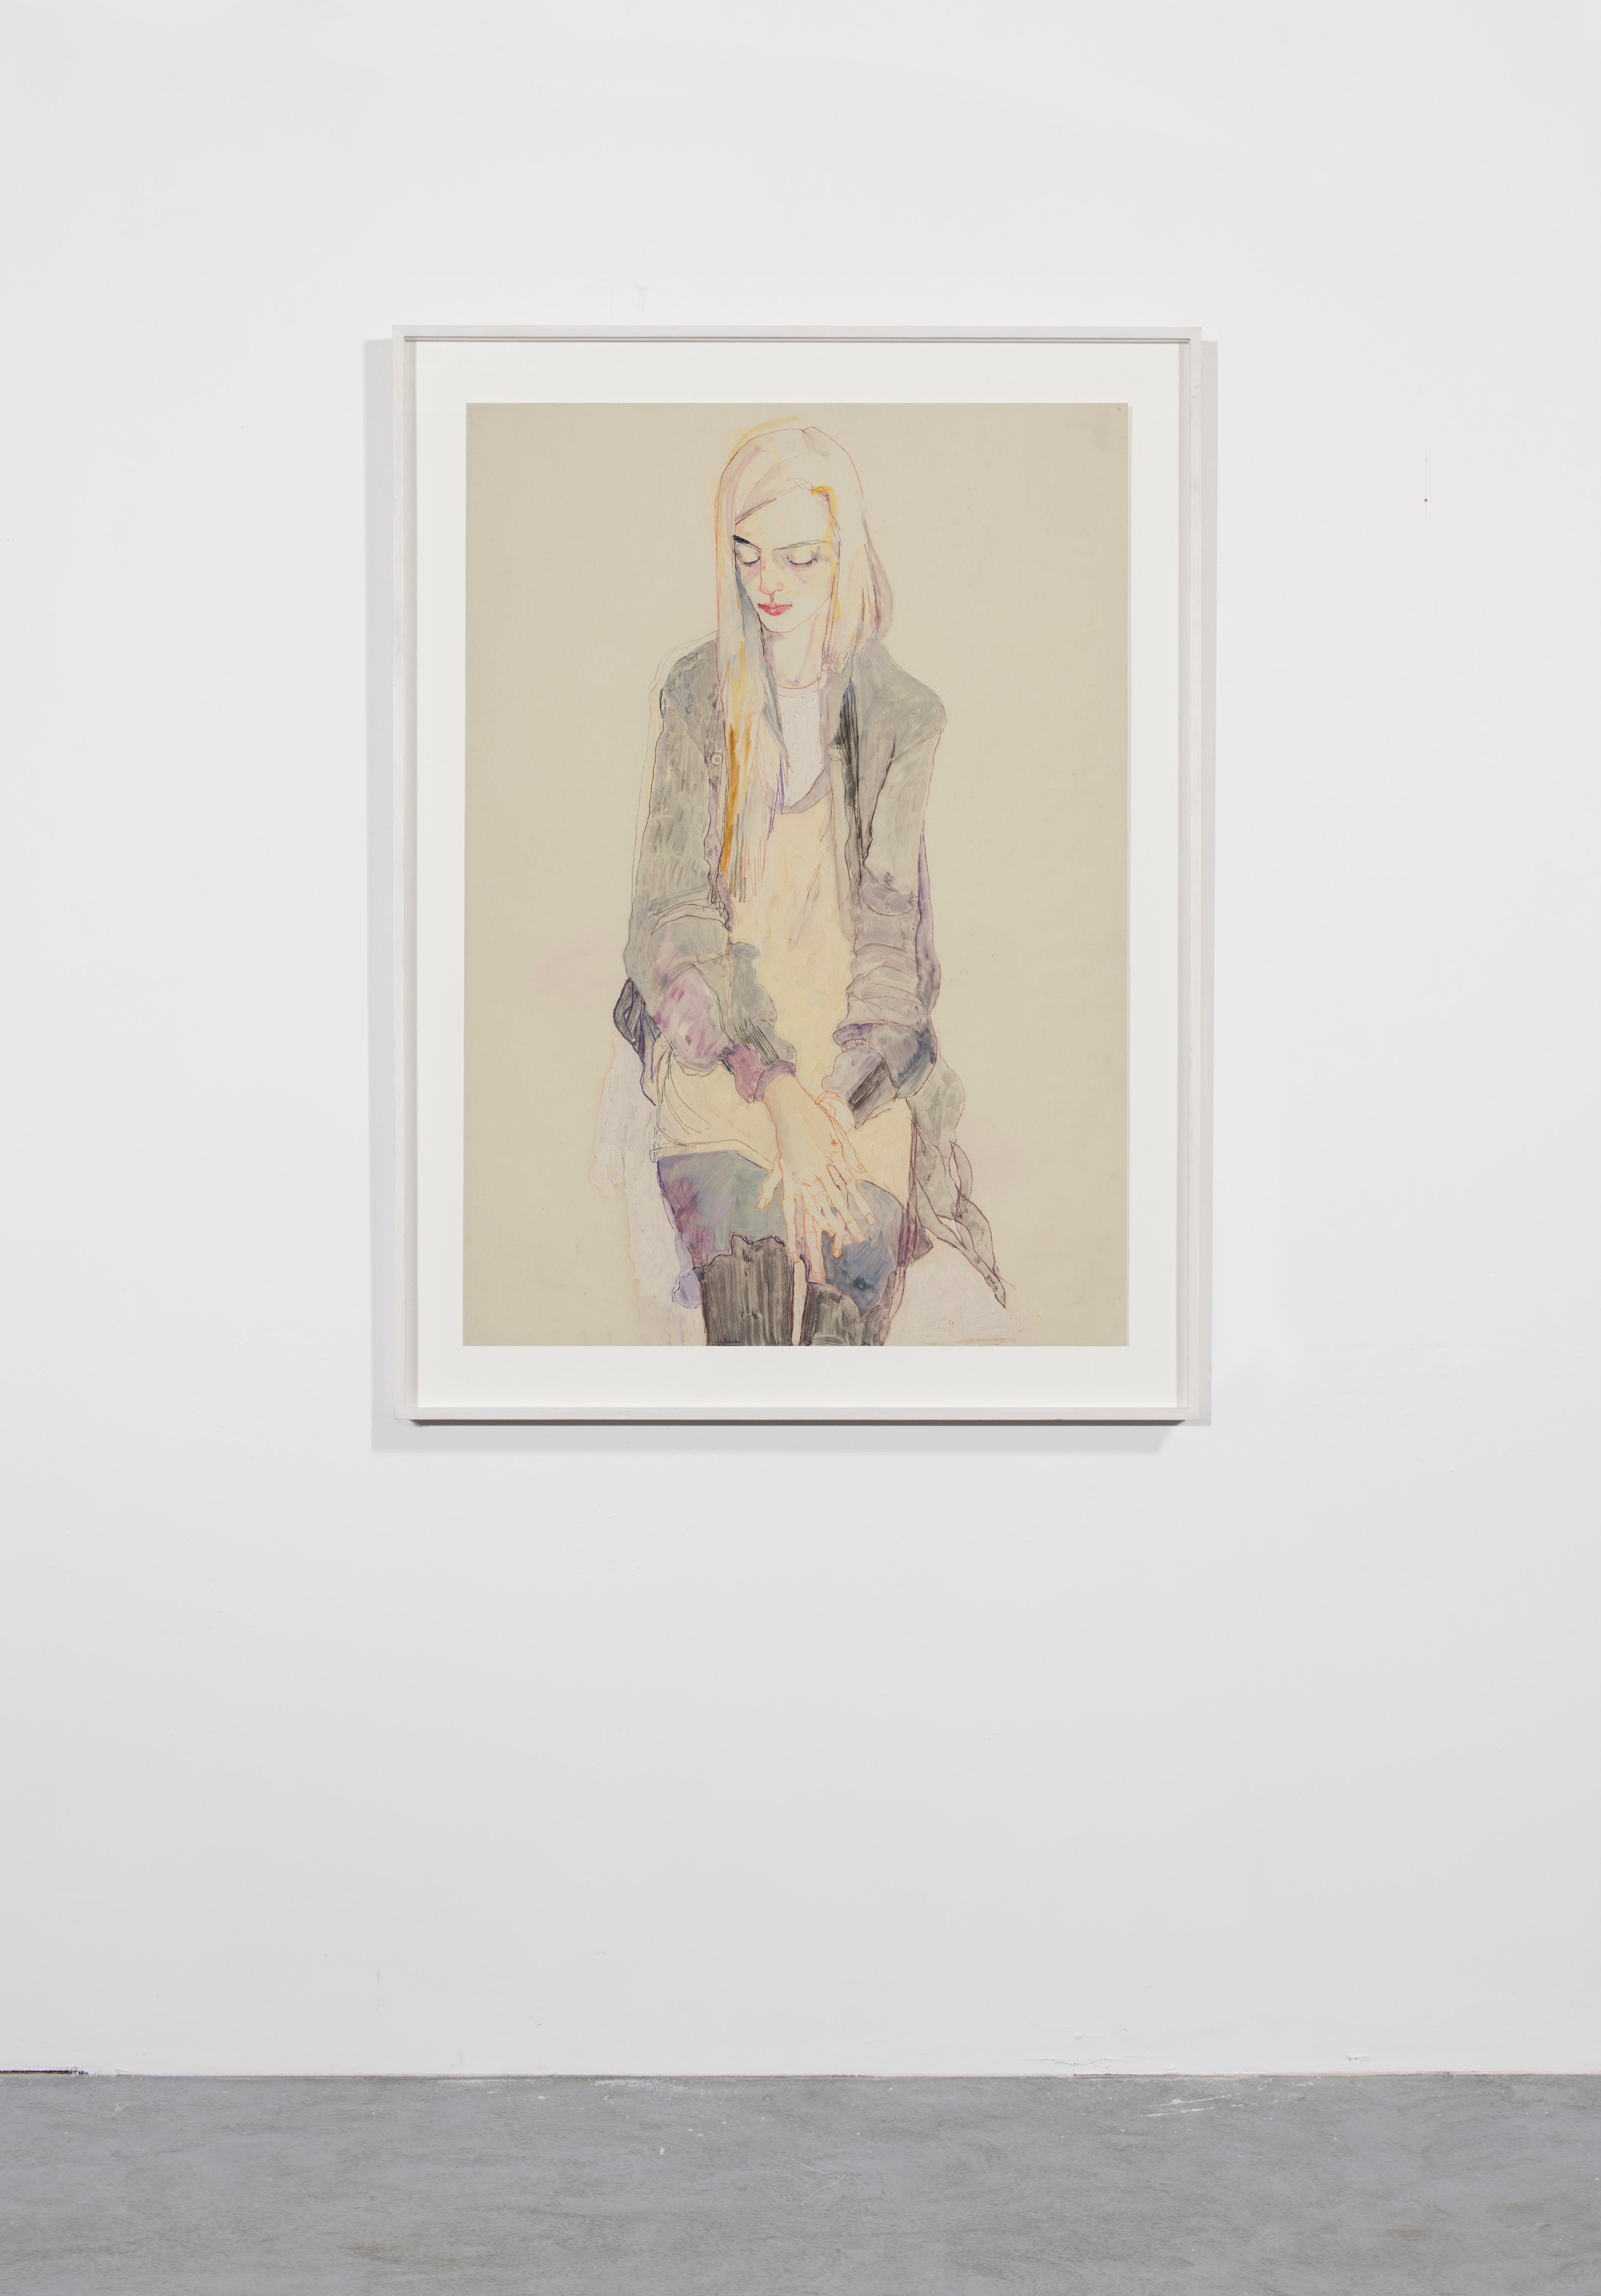 Elodie (Sitting, Looking Down), Mixed media on Pergamenata parchment - Contemporary Art by Howard Tangye